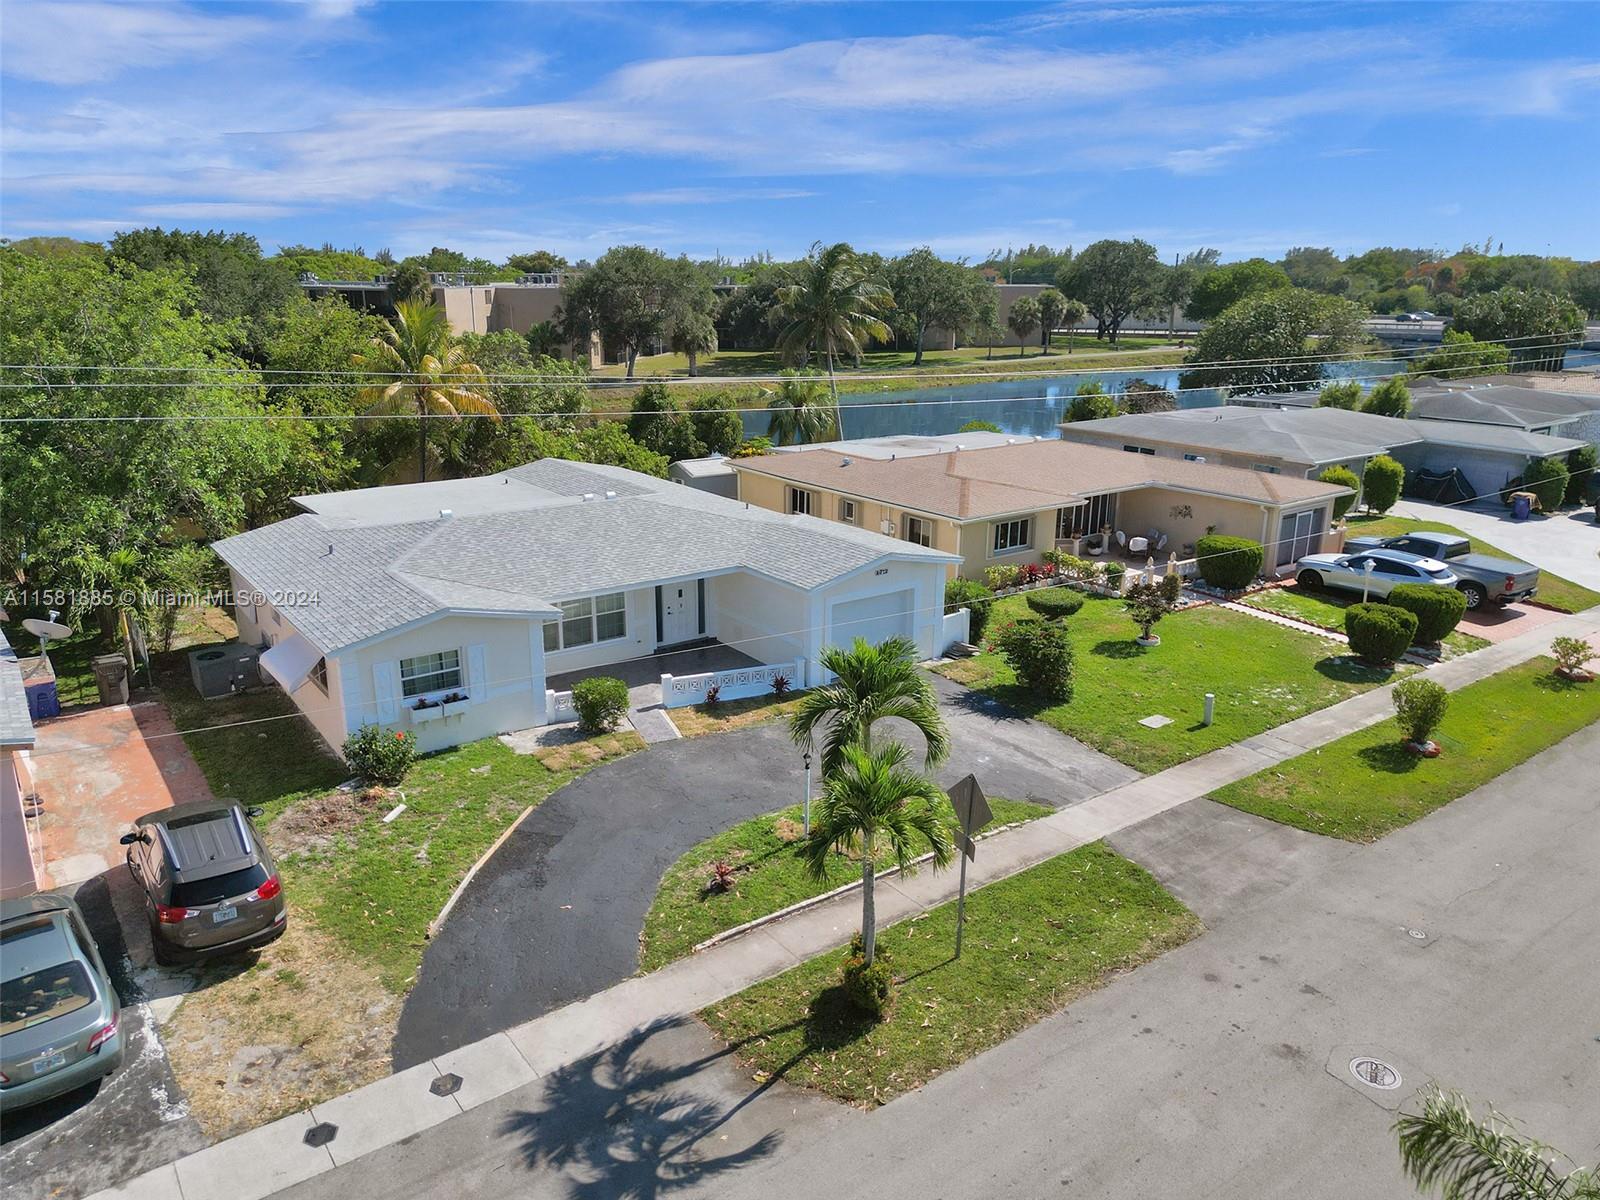 5072 Nw 39th St St, Lauderdale Lakes, Broward County, Florida - 5 Bedrooms  
2 Bathrooms - 